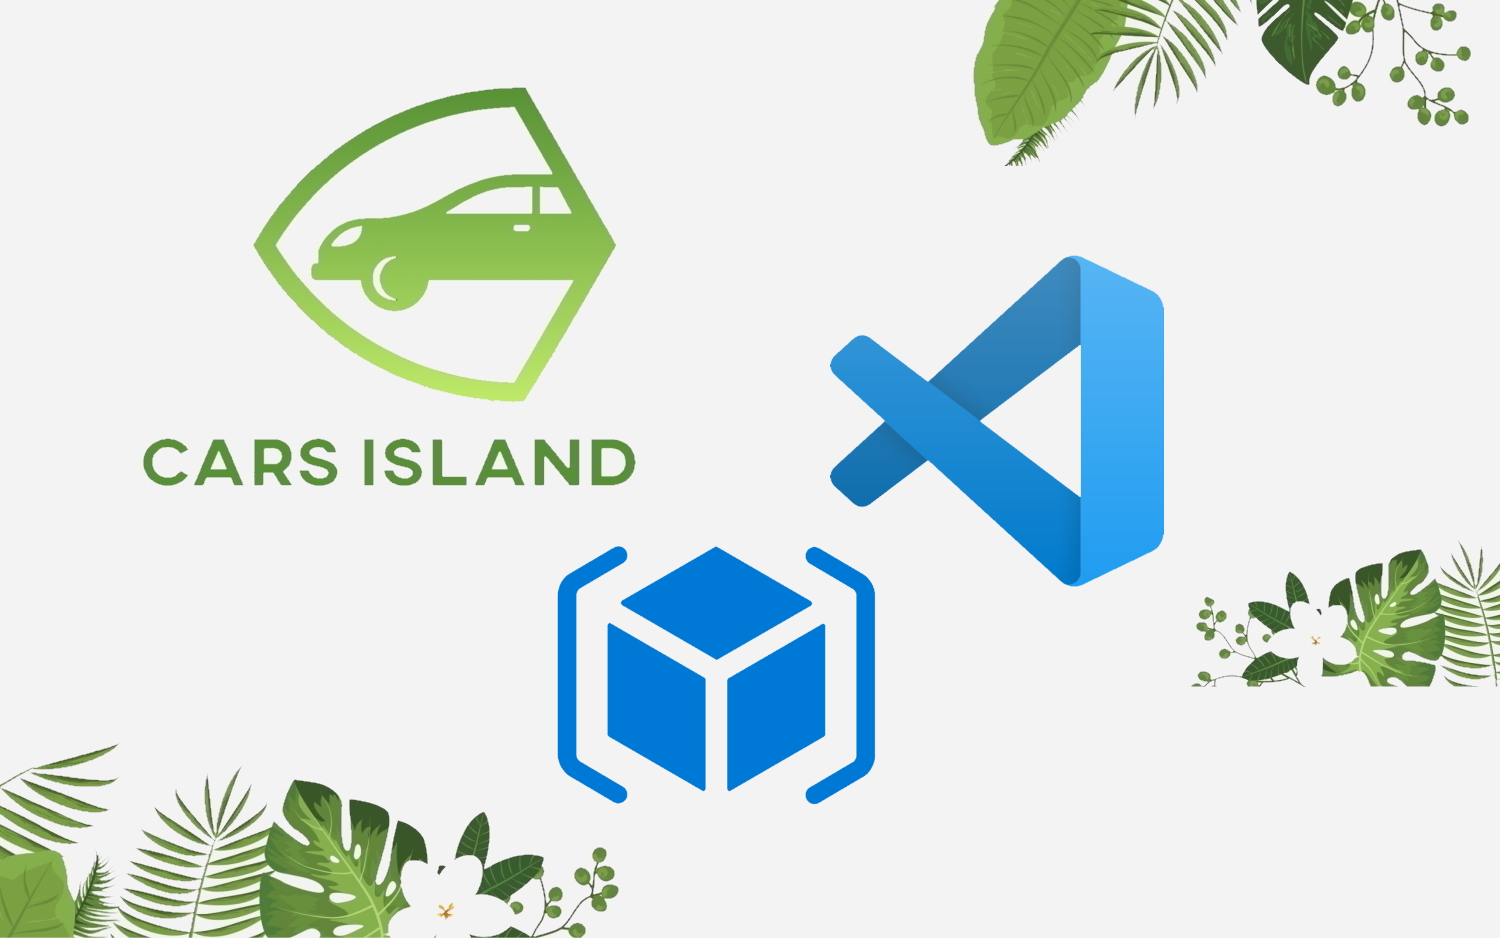 Cars Island - Azure Infrastructure as a Code - part 11